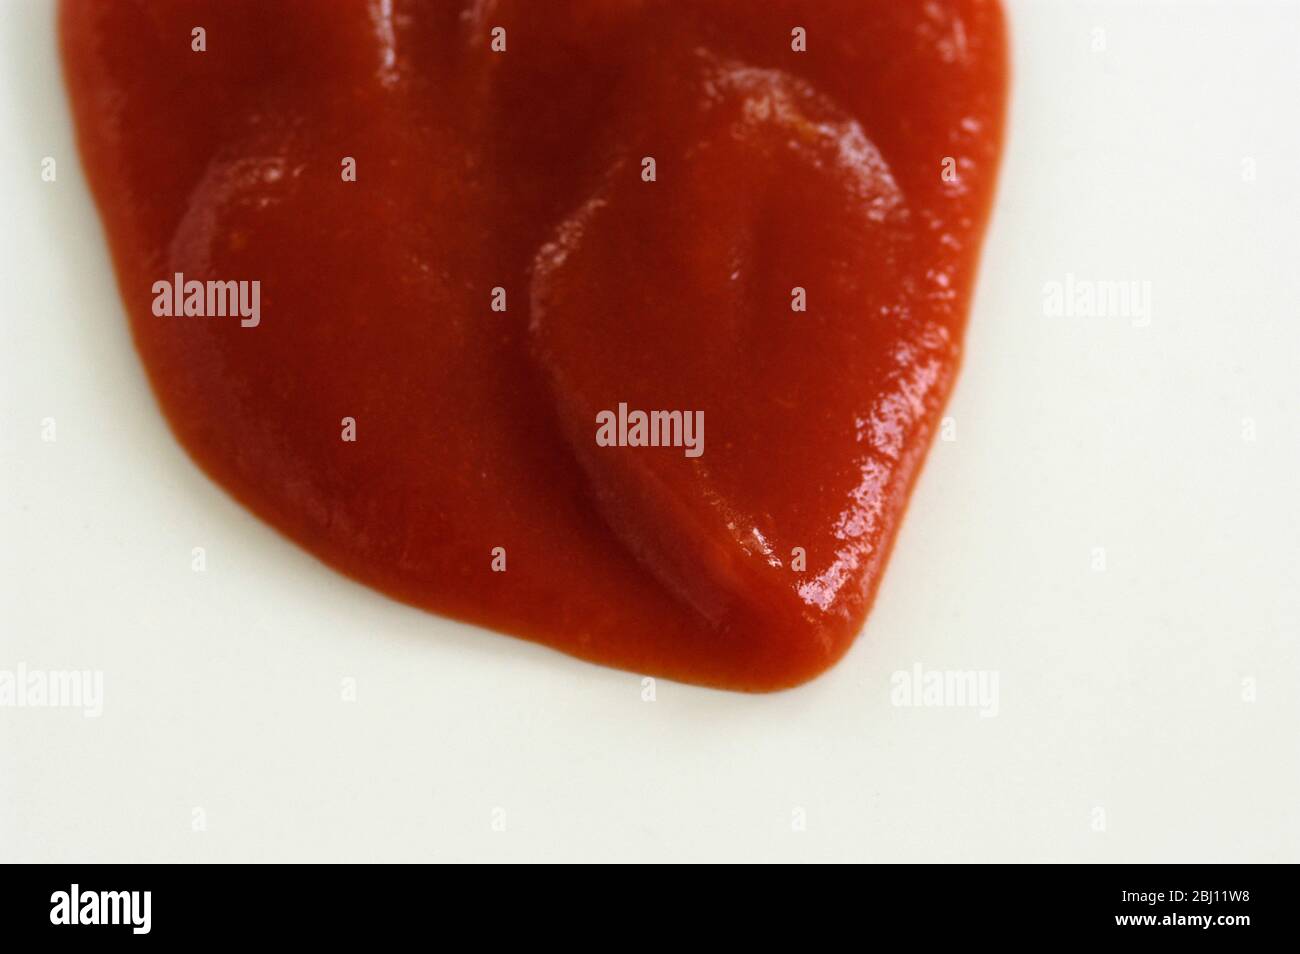 Dollop of tomato ketchup on white background - Stock Photo